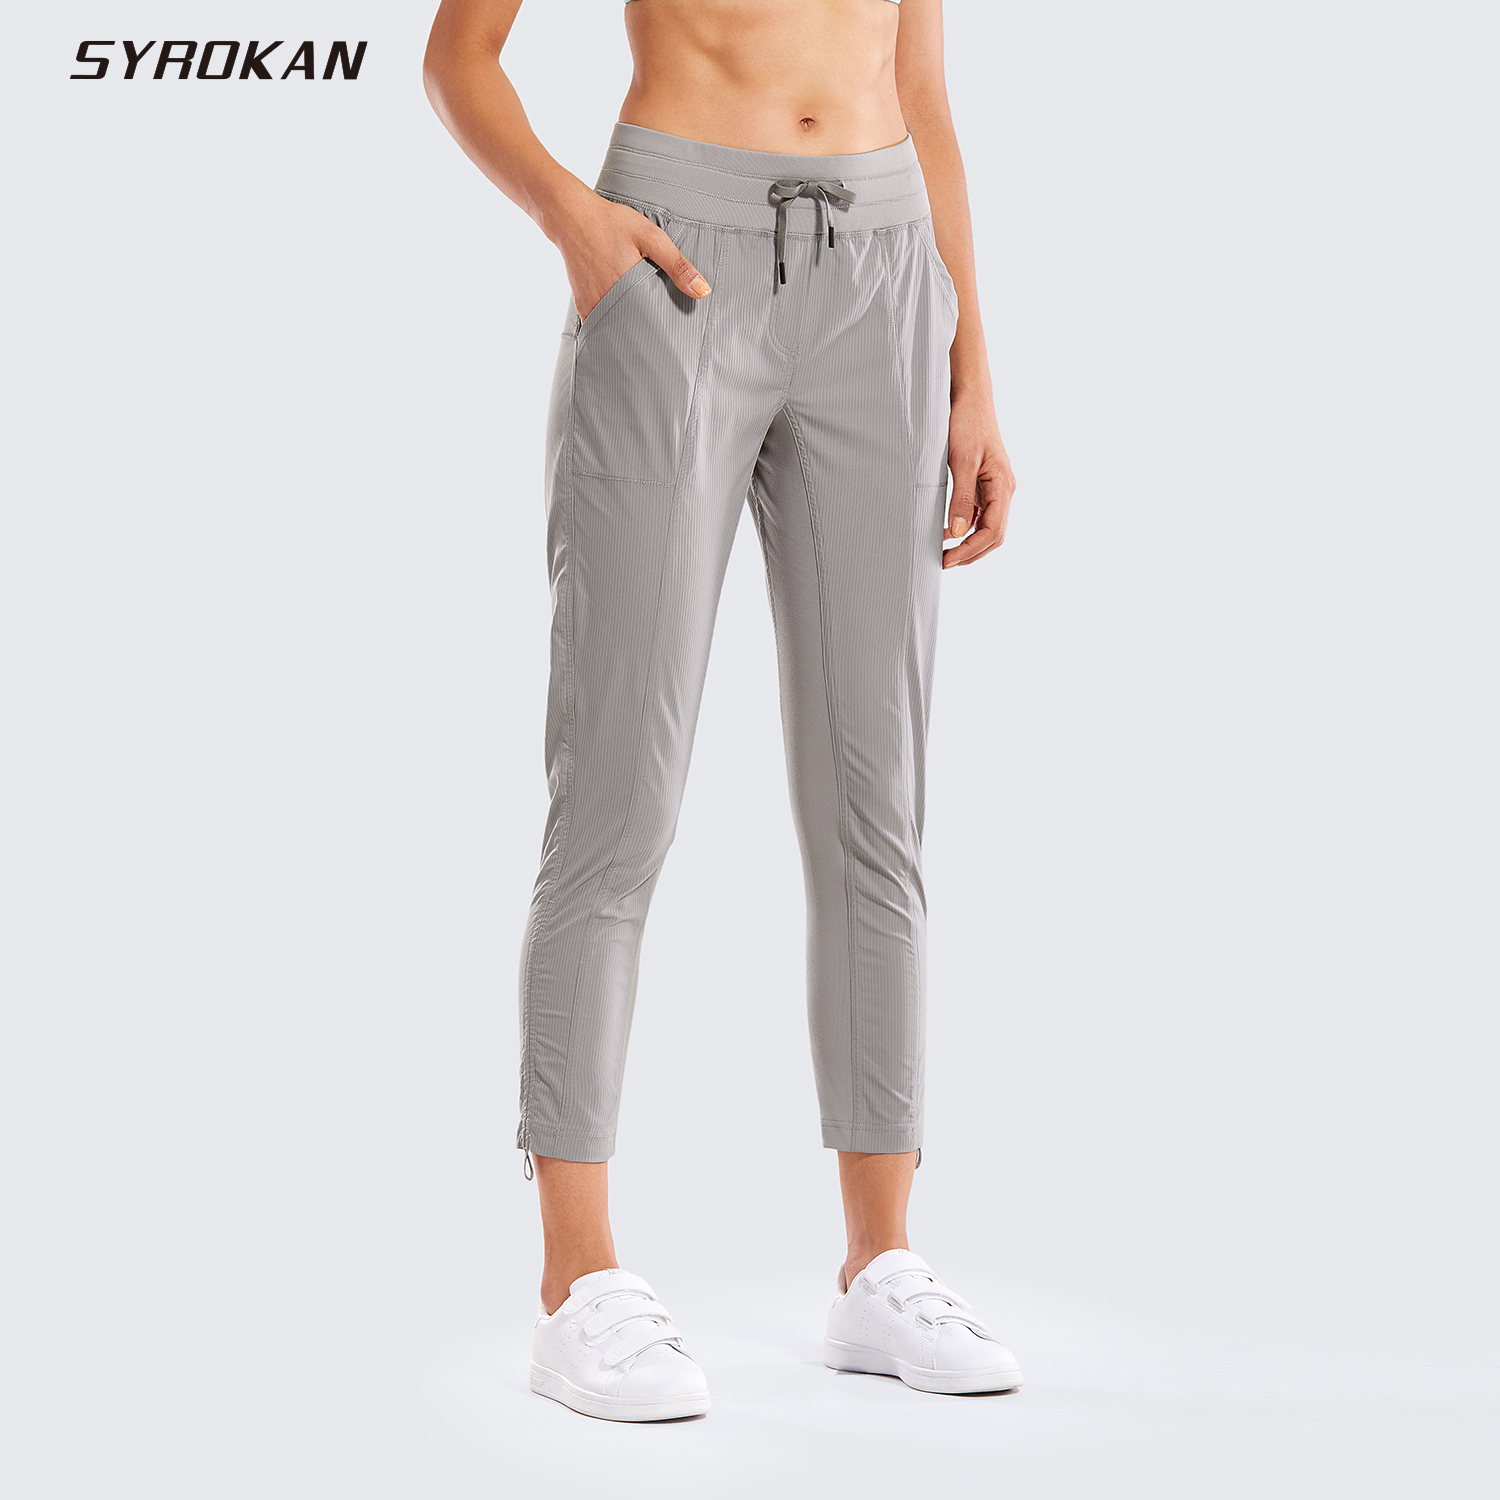 

Striped Pants SYROKAN Women's Go to Studio Joggers Tapered Leg Sweatpants with Pockets -27Inches, Olive yellow08